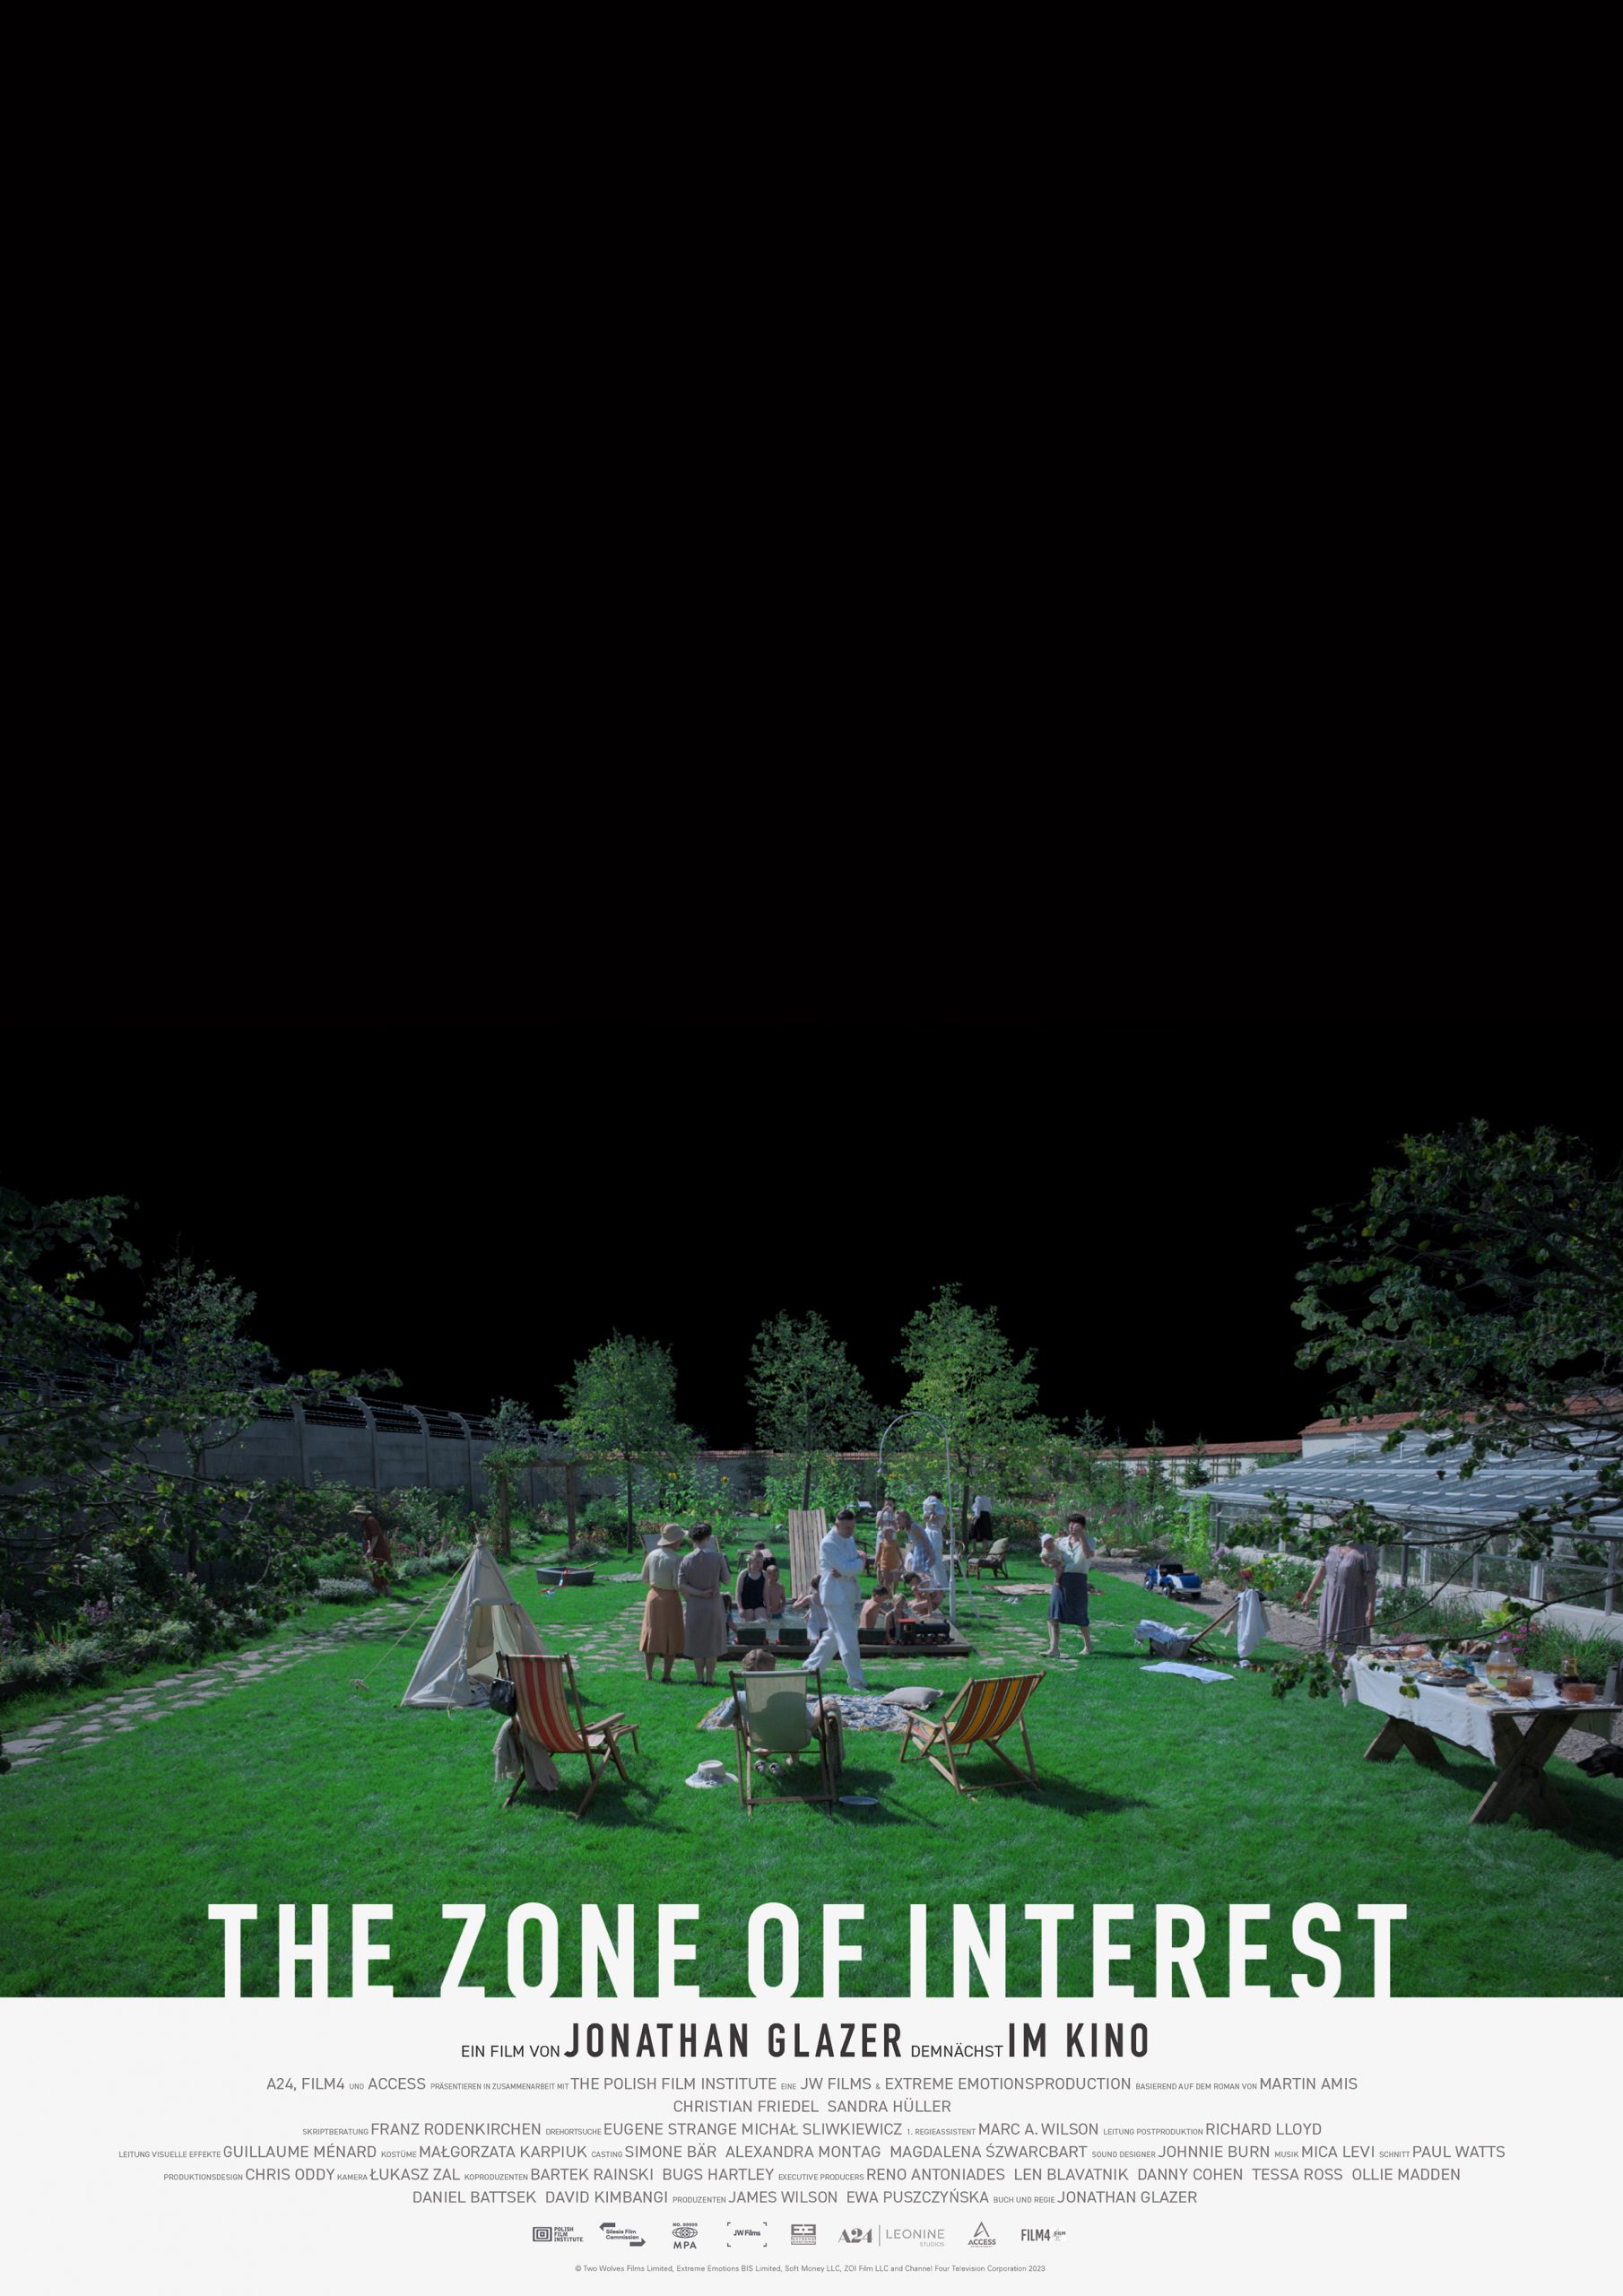 THE ZONE OF INTERST